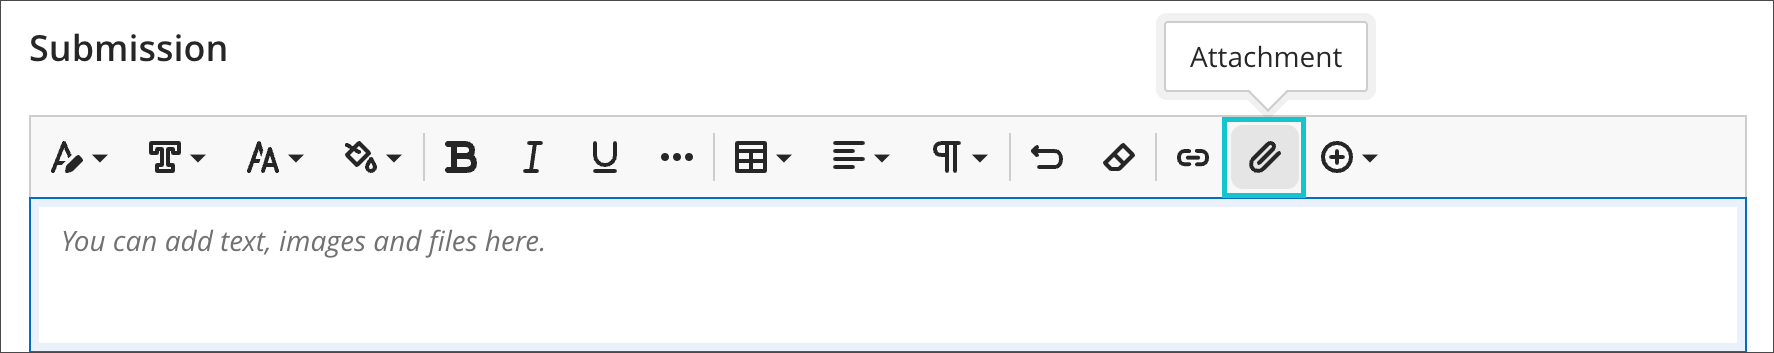 Select the Submission box to display the WYSIWYG text editor and start working on your submission